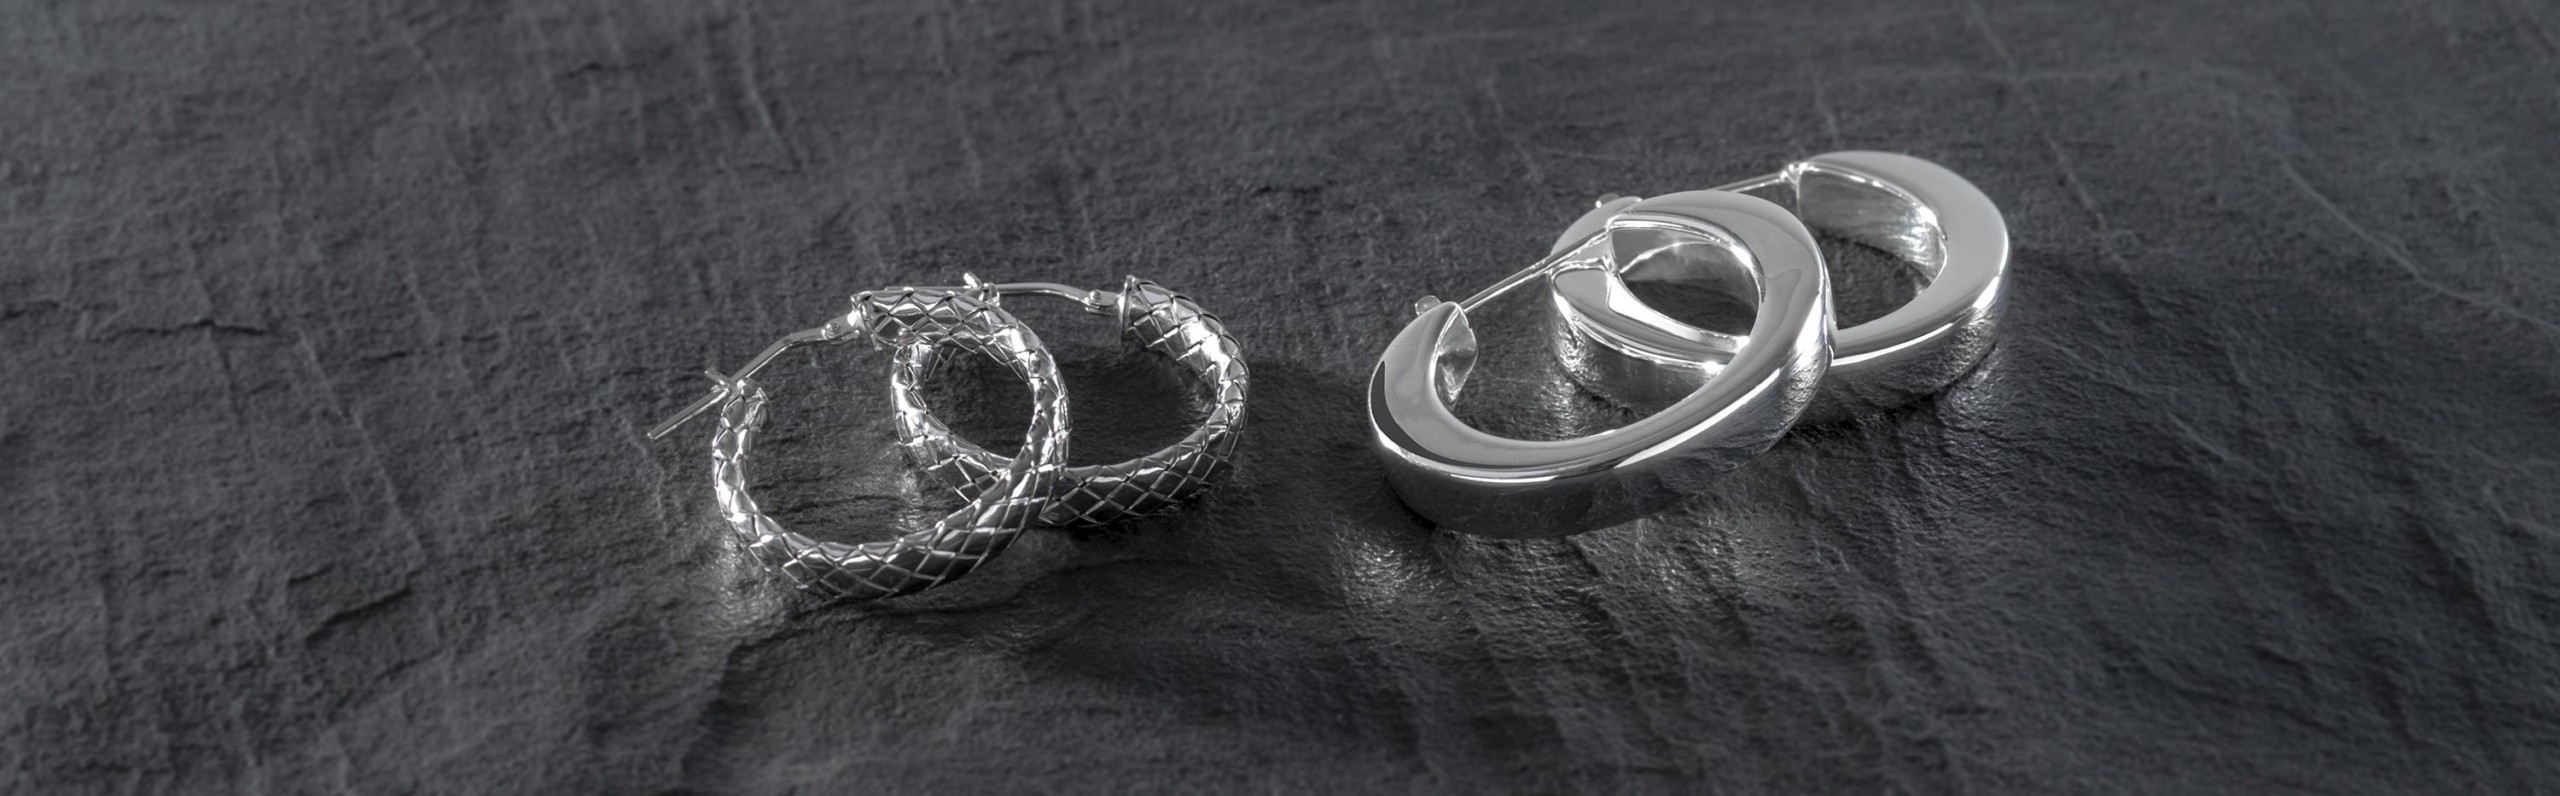 Silver Earrings - Dawes Jewellery Home Page